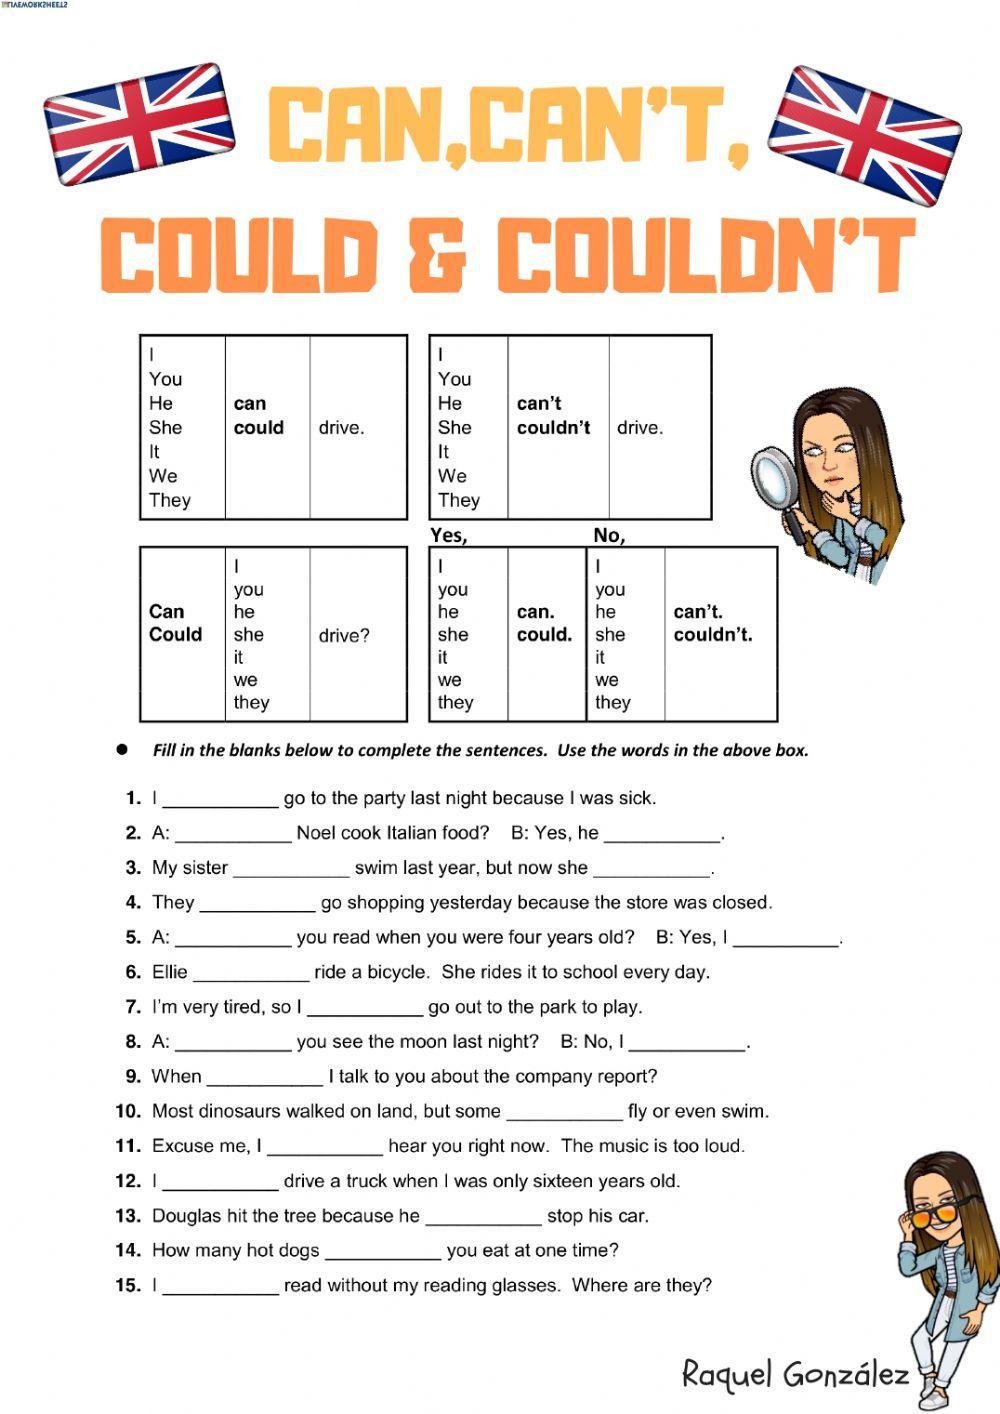 Can-Could (Modal Verbs) worksheet | Live Worksheets